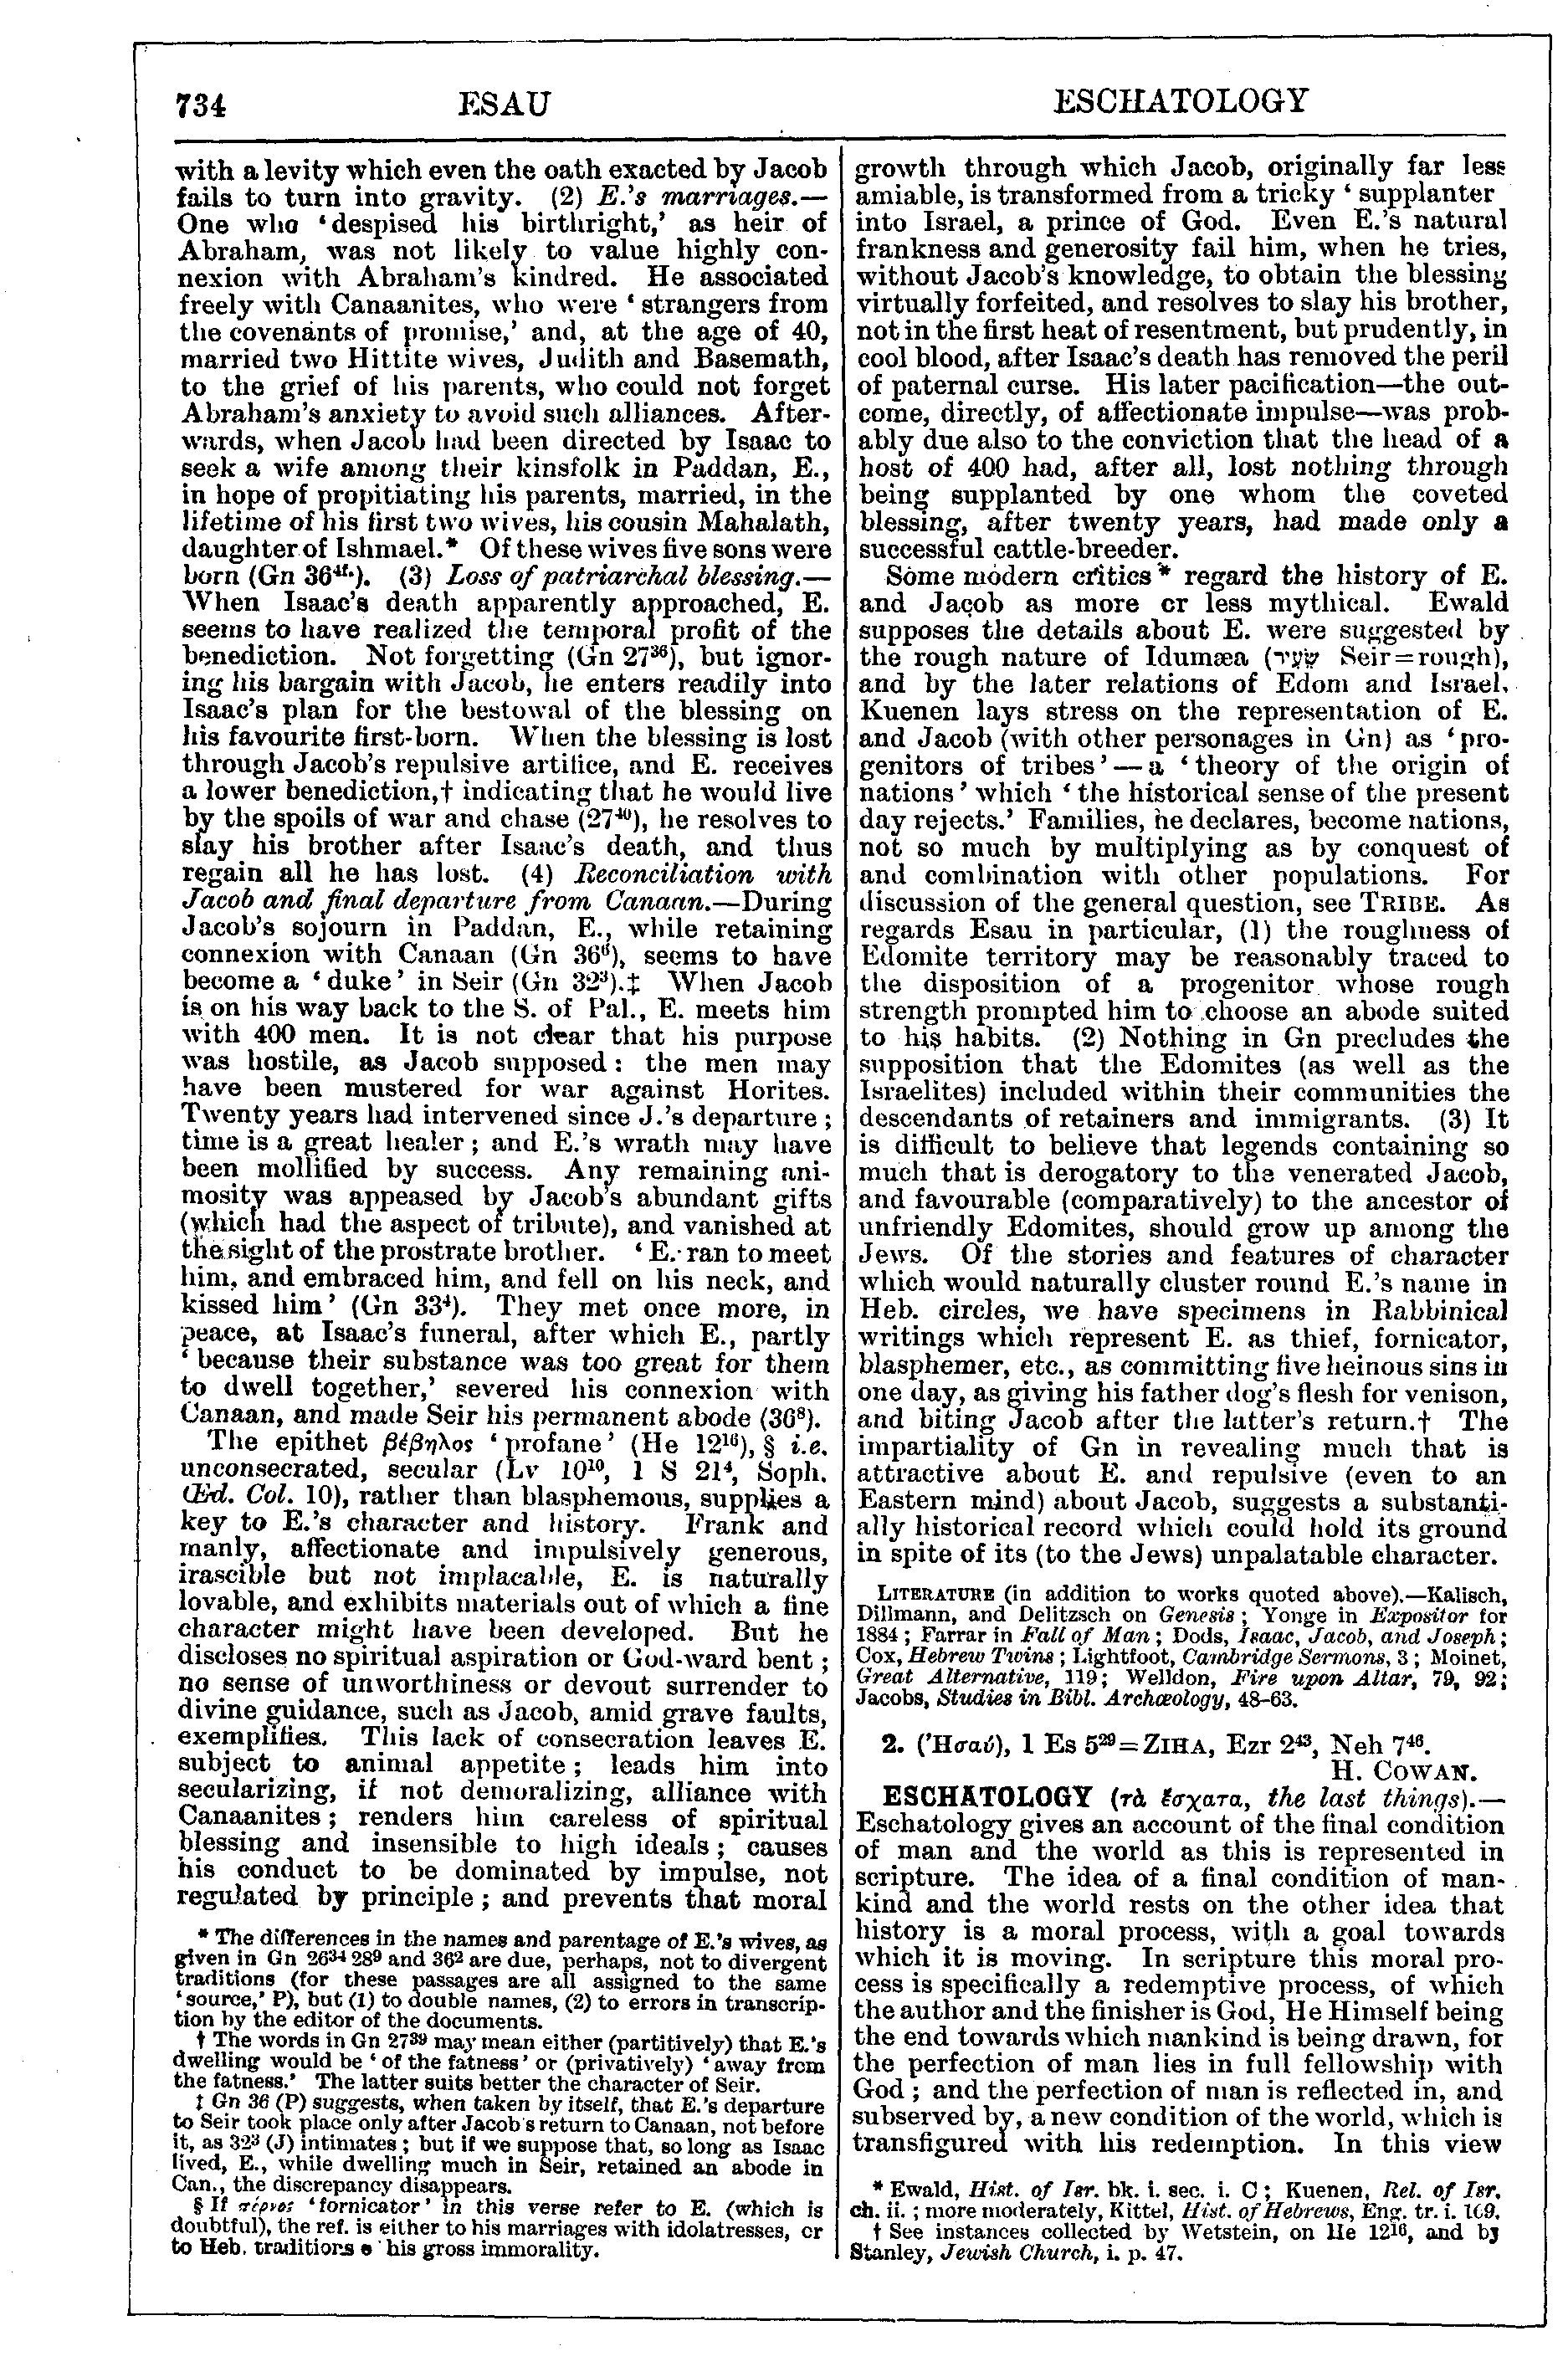 Image of page 734